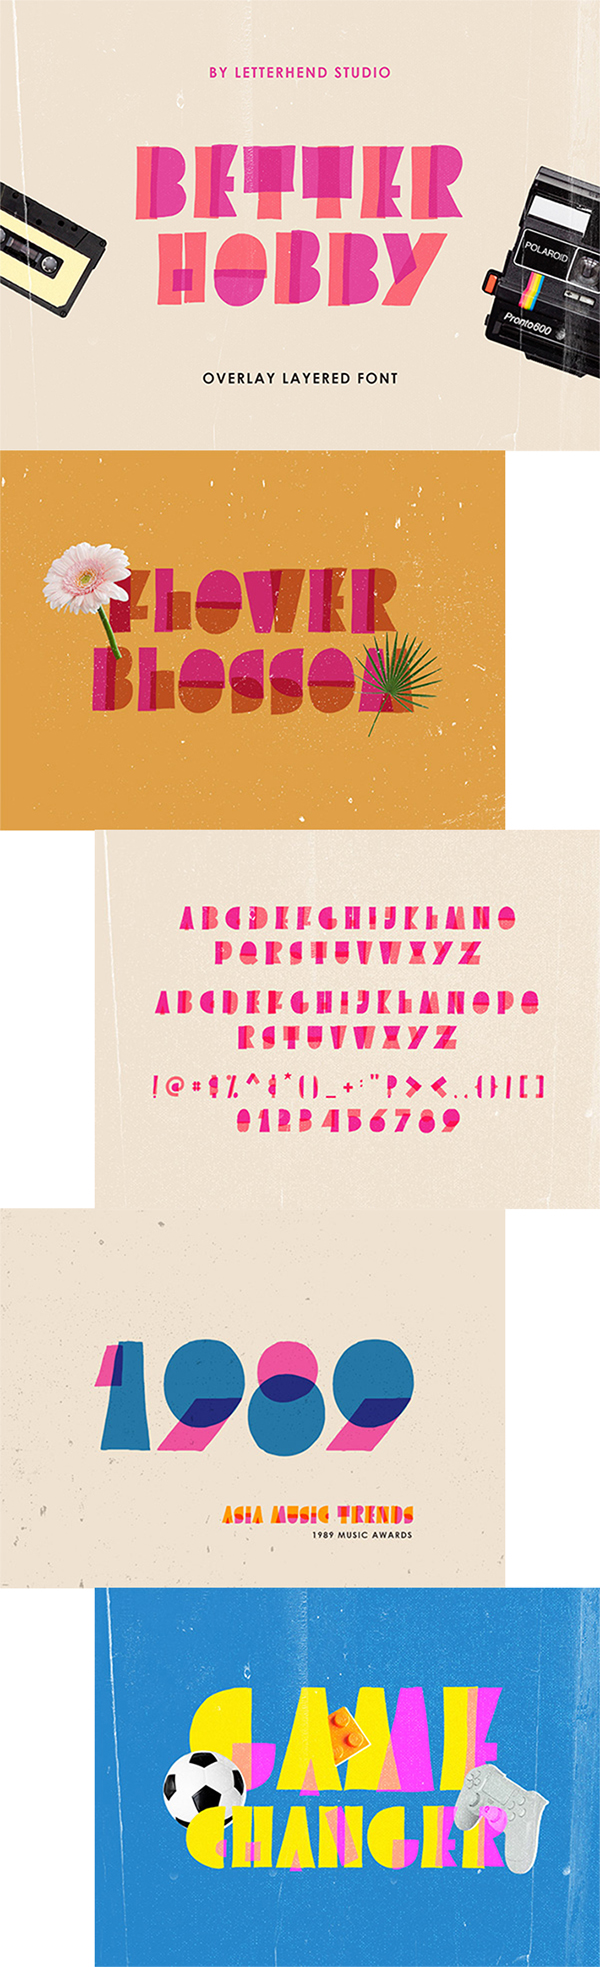 Free Awesome Stylish Bette Hobby Display Font